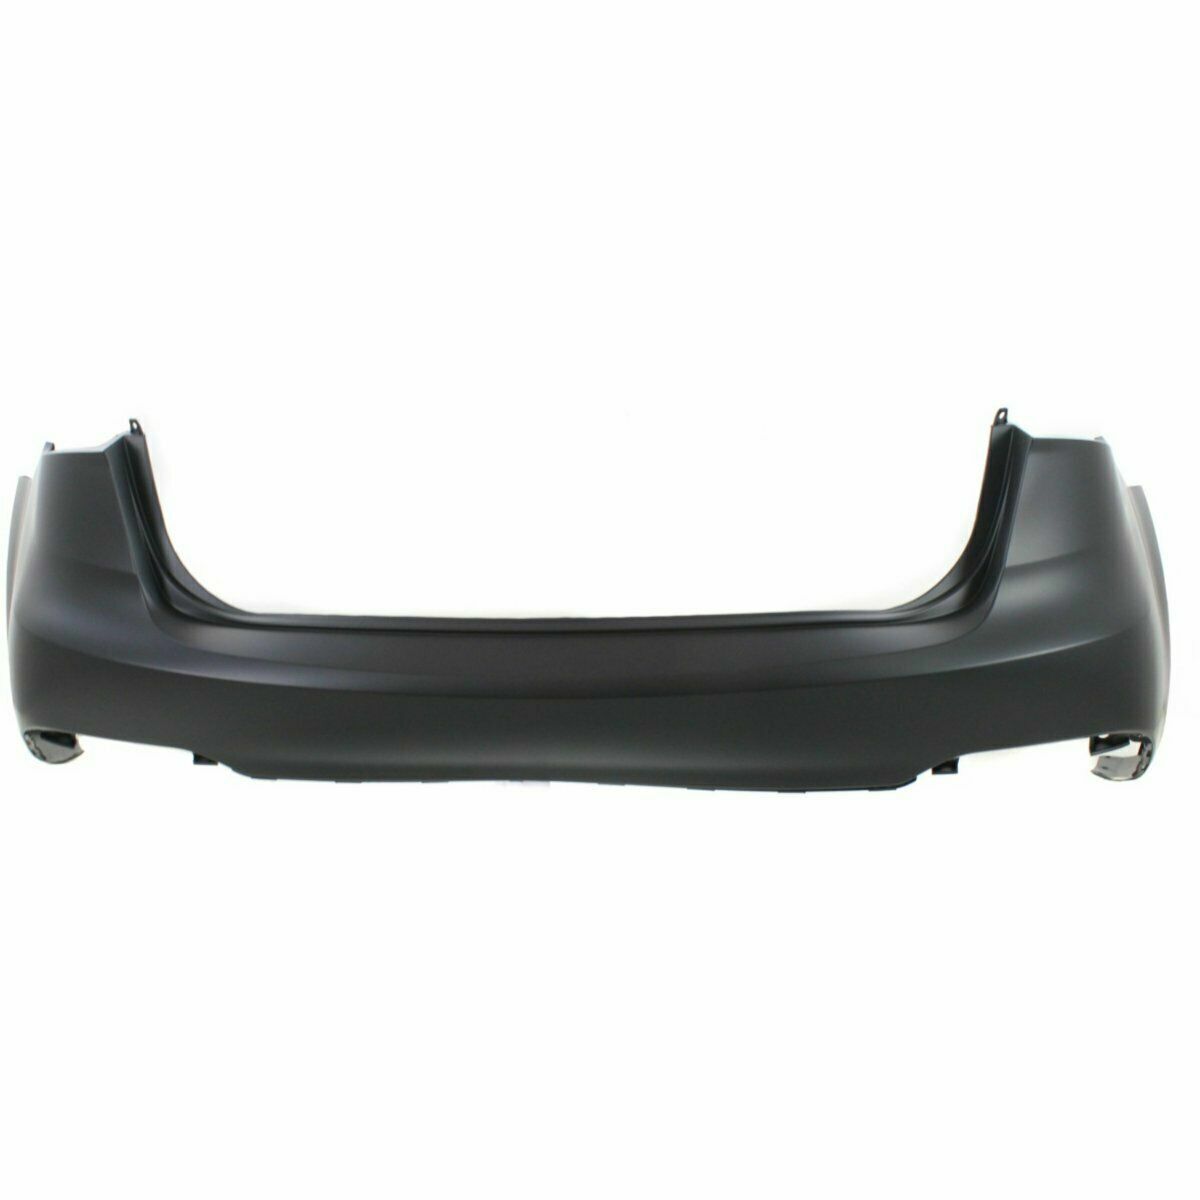 2014-2016 KIA FORTE; Rear Bumper Cover; Painted to Match